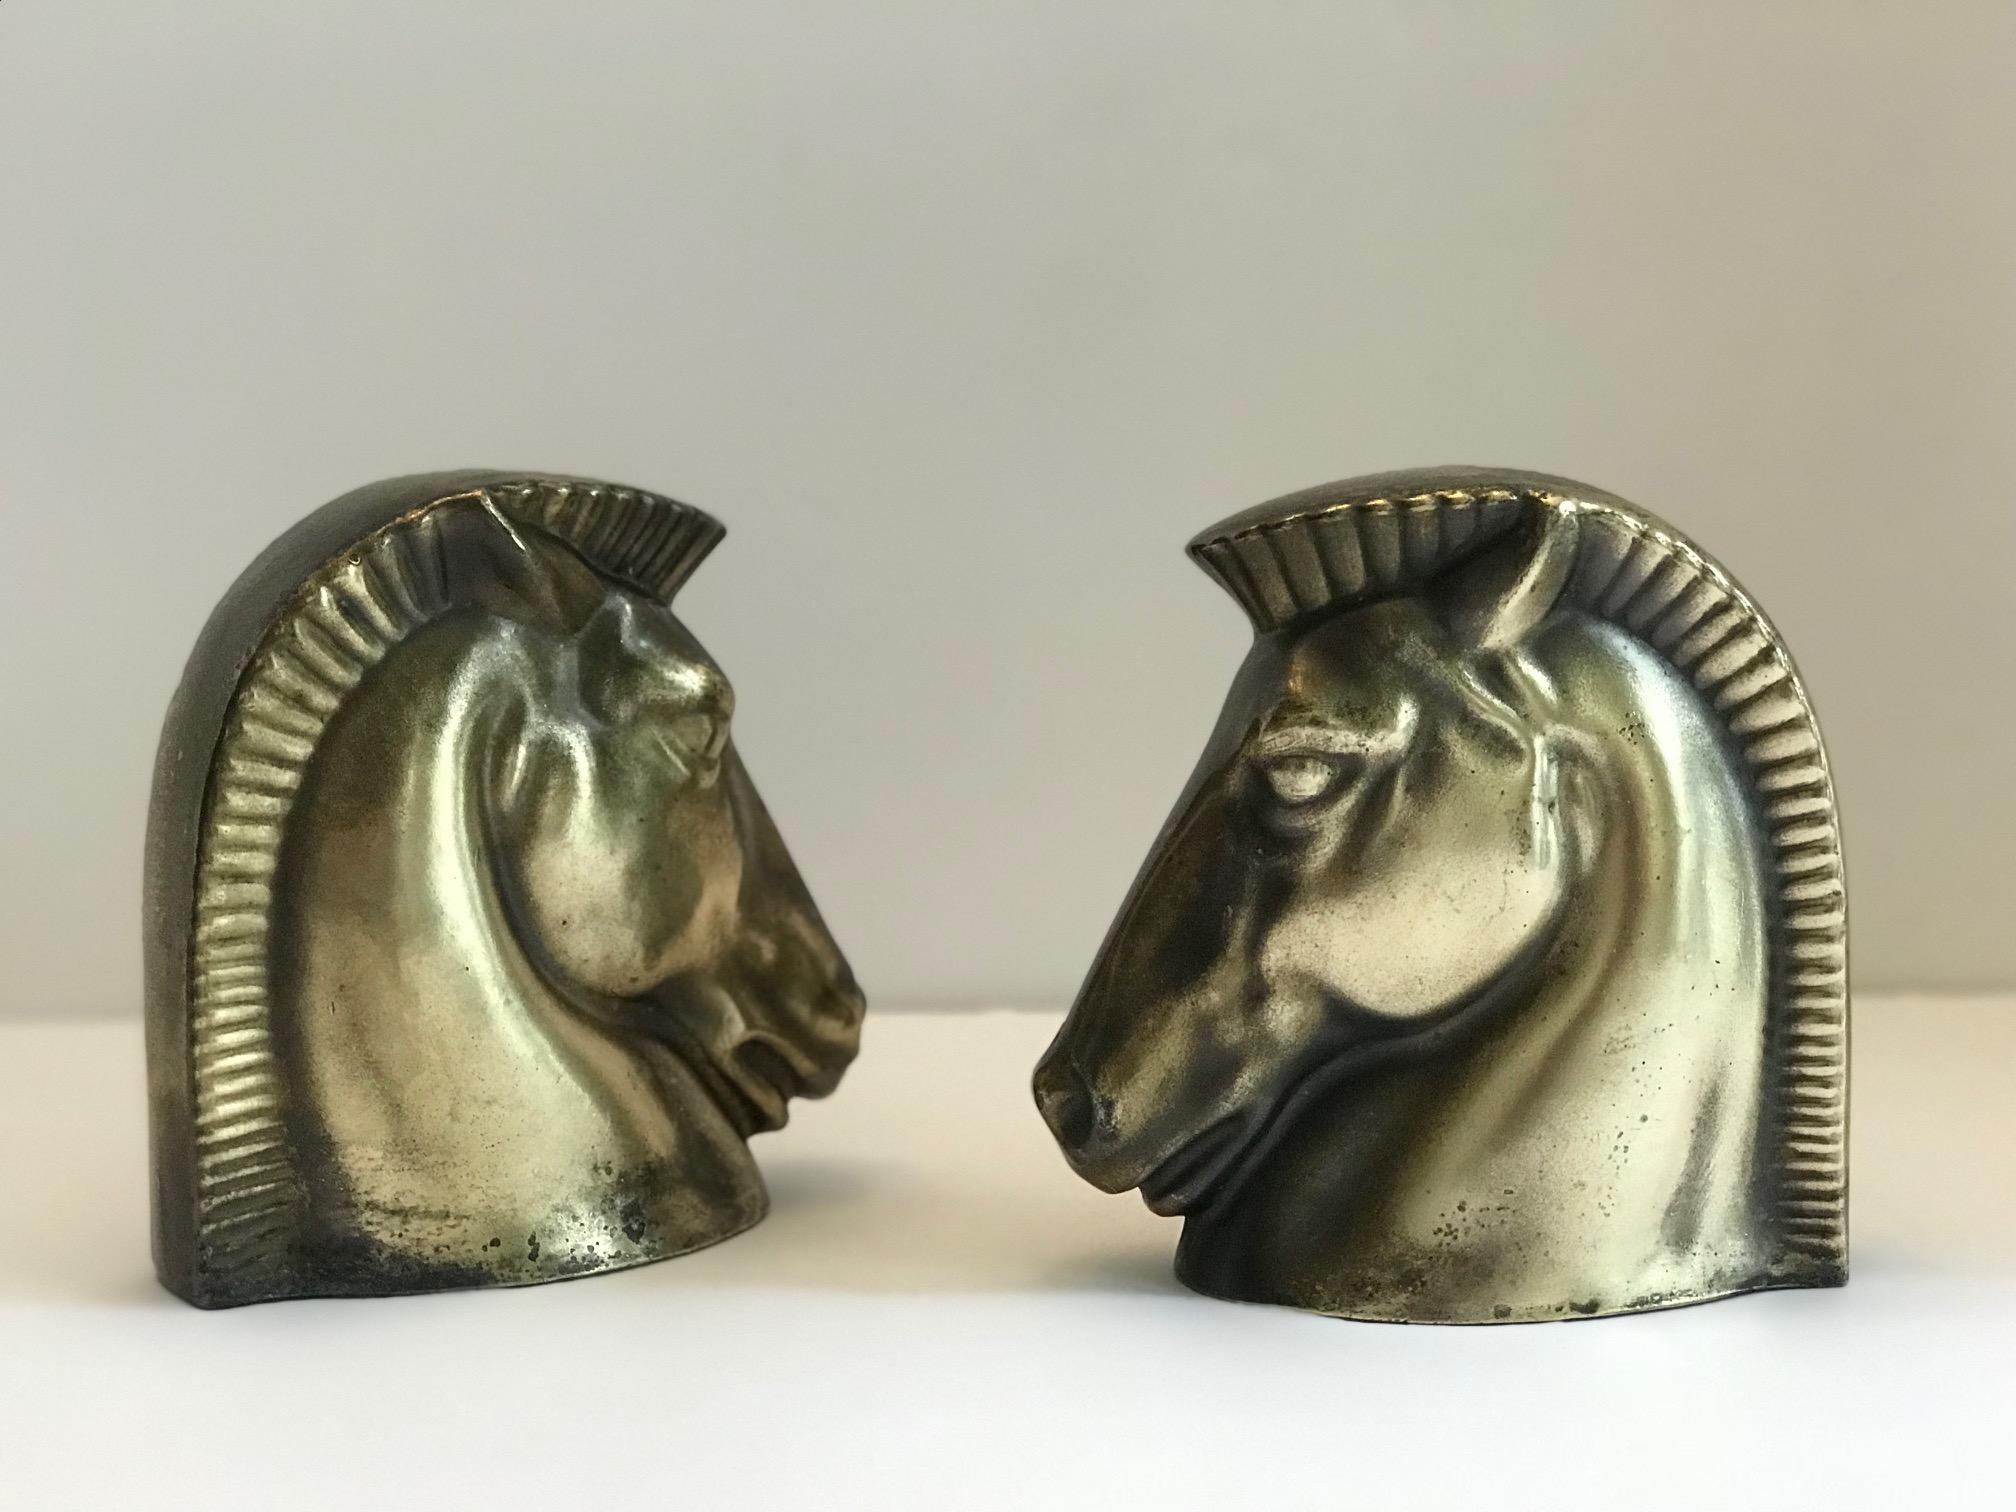 American Pair of Art Deco Brass Plated Trojan Horse Bookends by Frankart